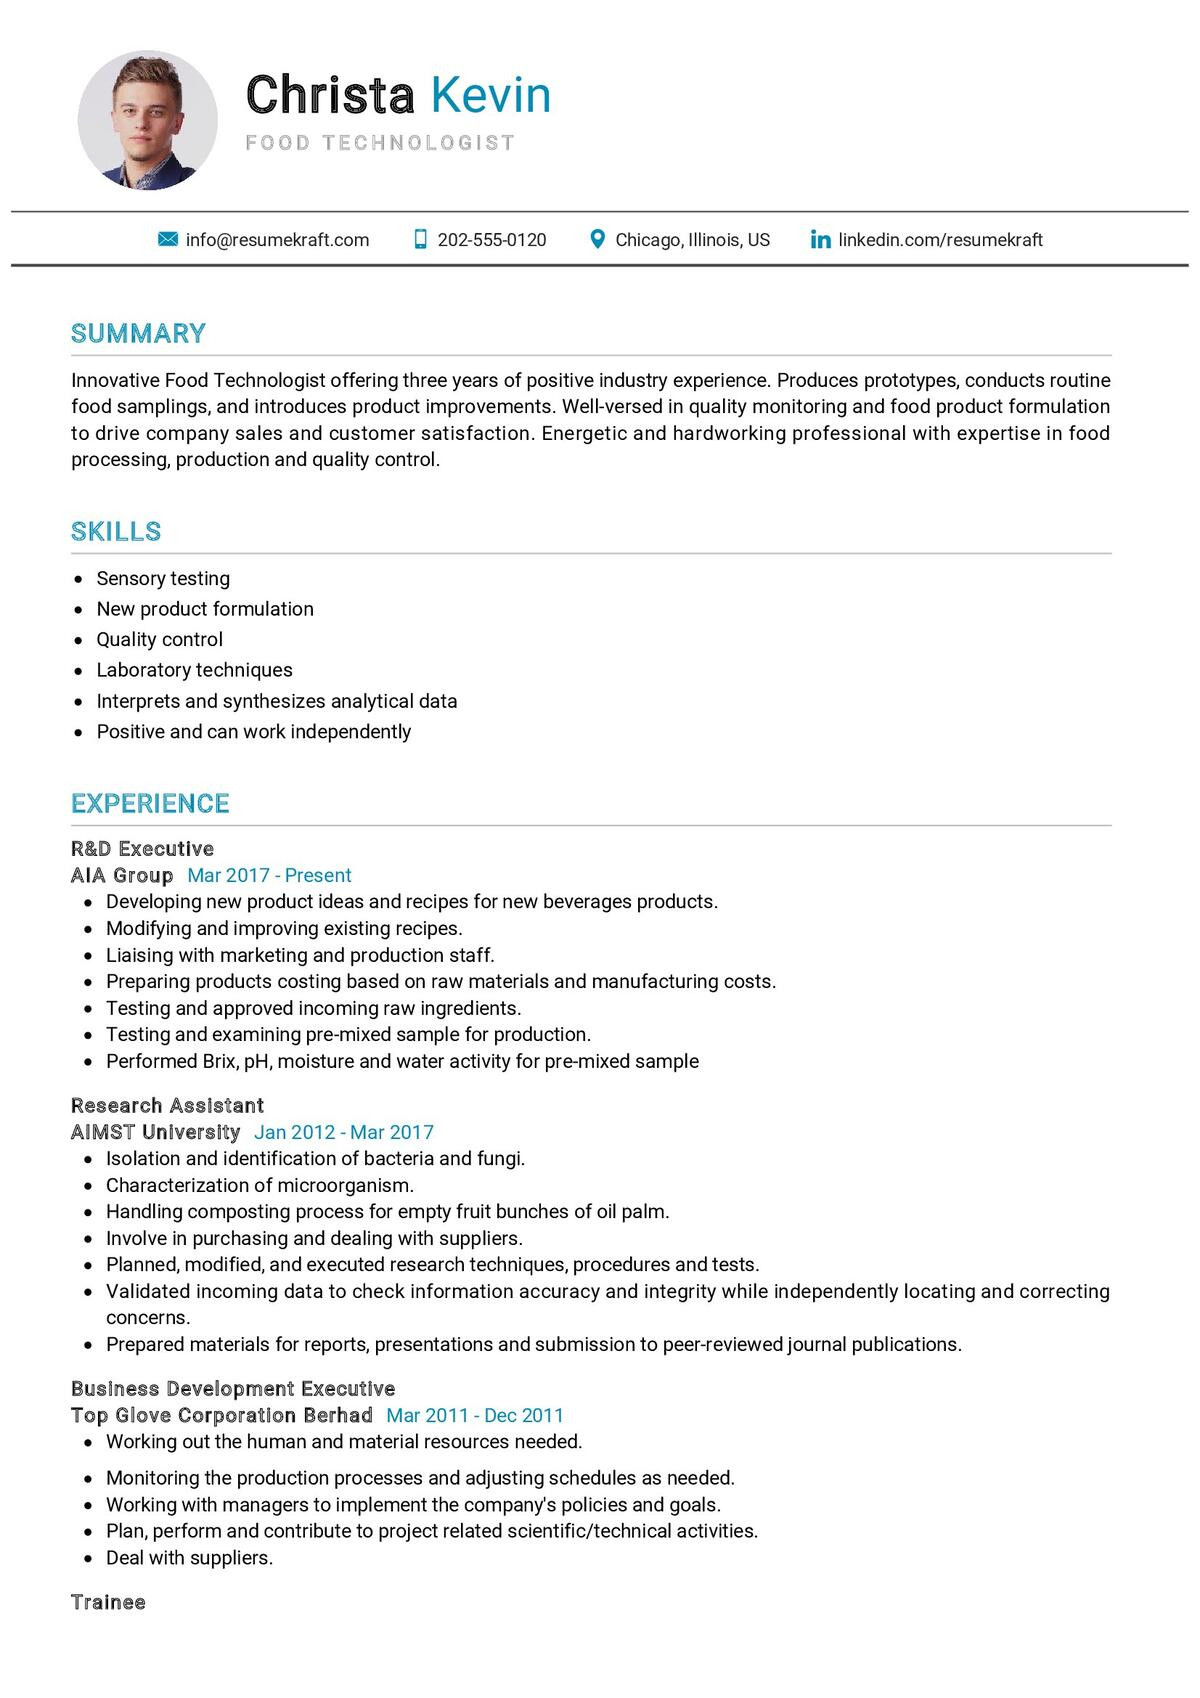 Sample Resume Objective Statements for Material Science Graduate Student Food Technologist Resume Sample 2021 Writing Guide – Resumekraft